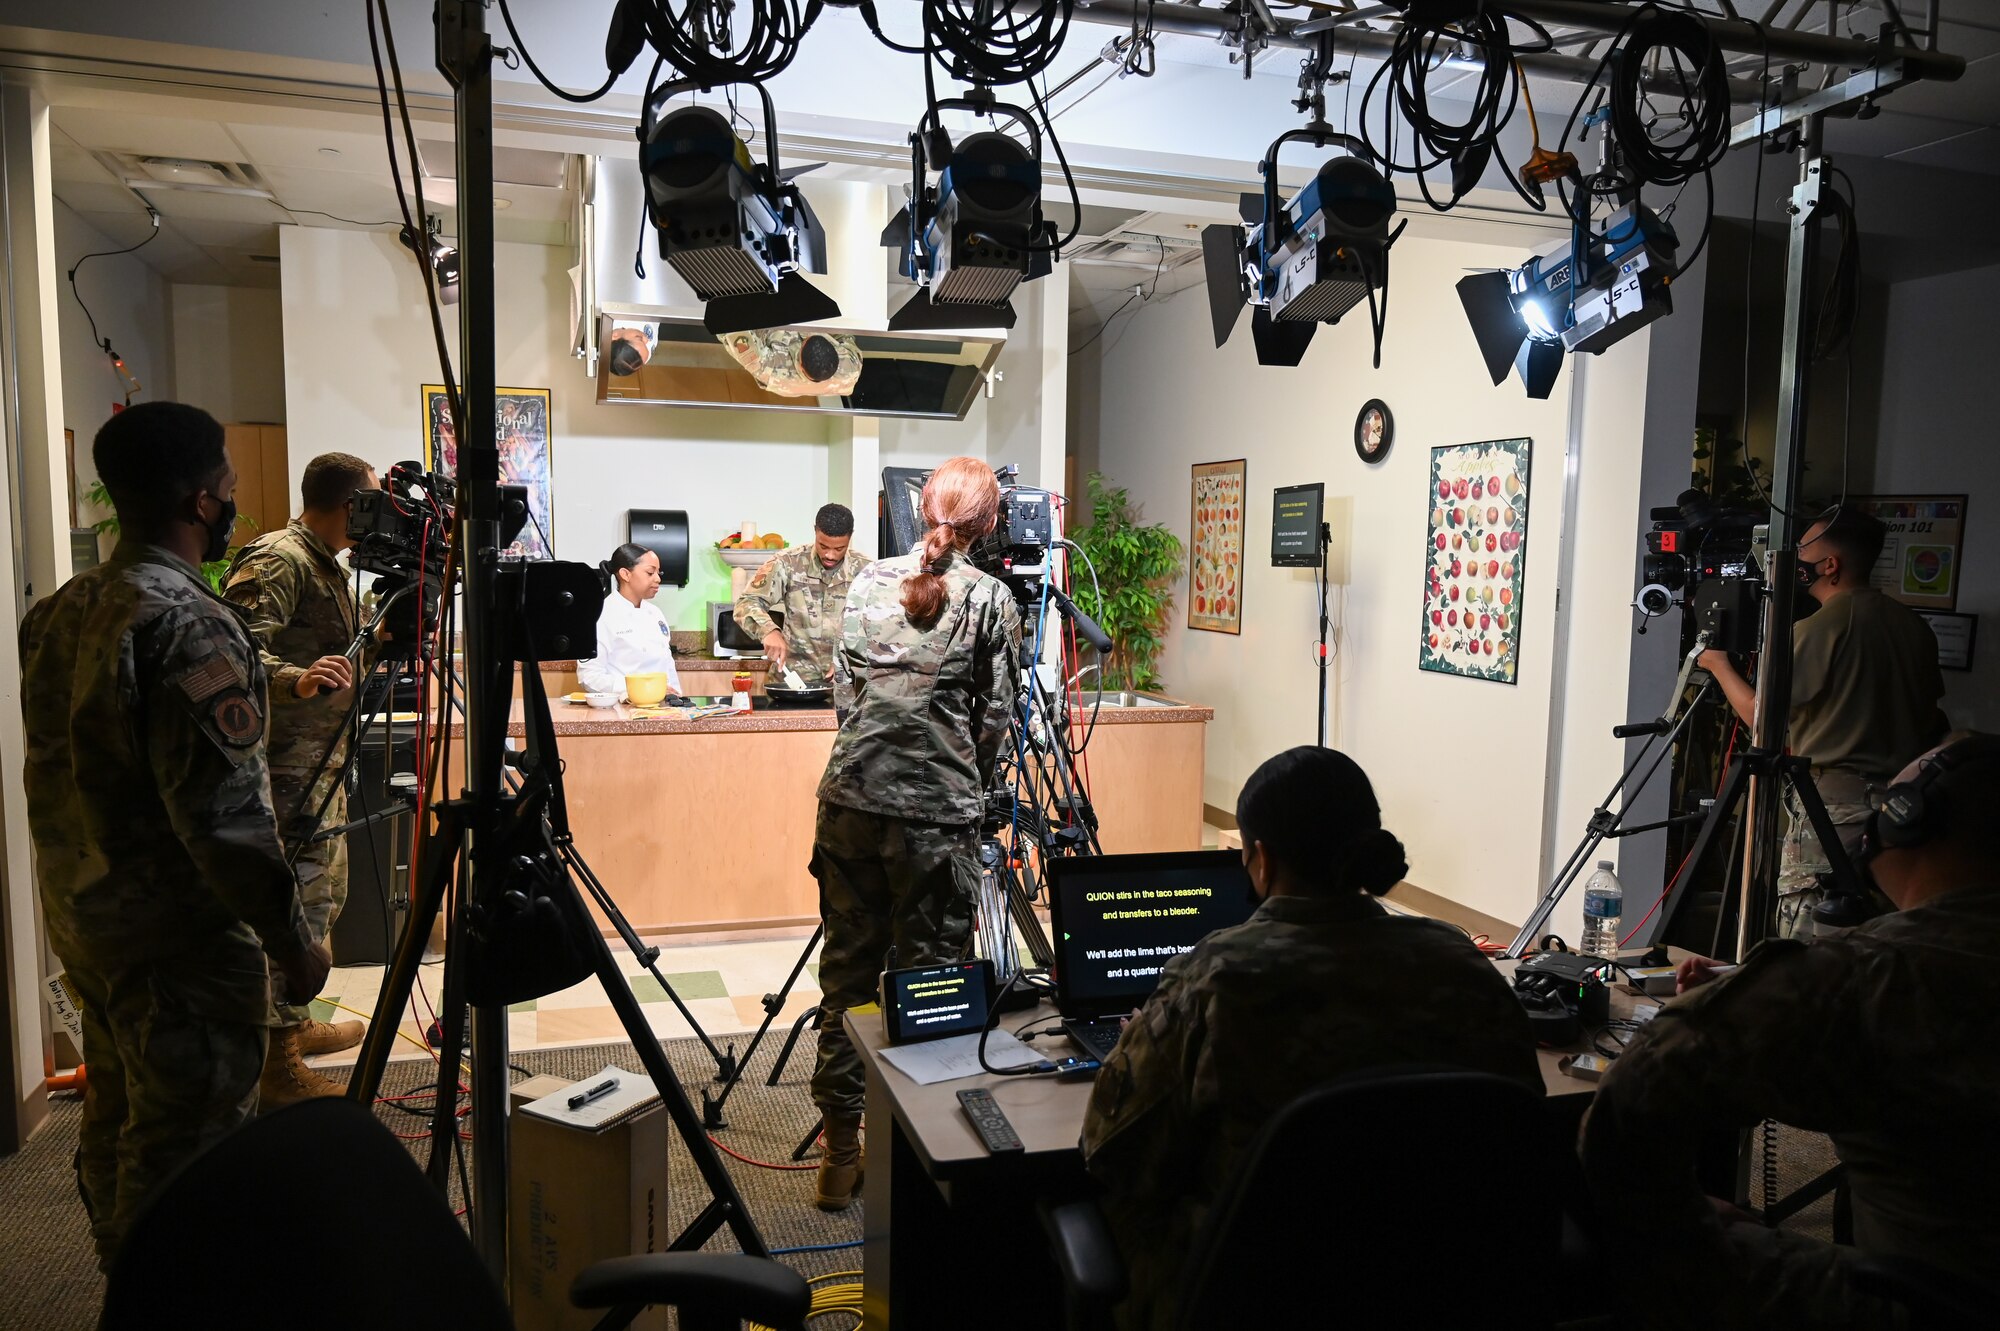 Members from the 2d Audiovisual Squadron film a Nutrition Kitchen series Aug. 9, 2021, at Hill Air Force Base, Utah. 2d AVS is producing the series for the Air Force Surgeon General about making healthy cooking choices and the science behind those choices.